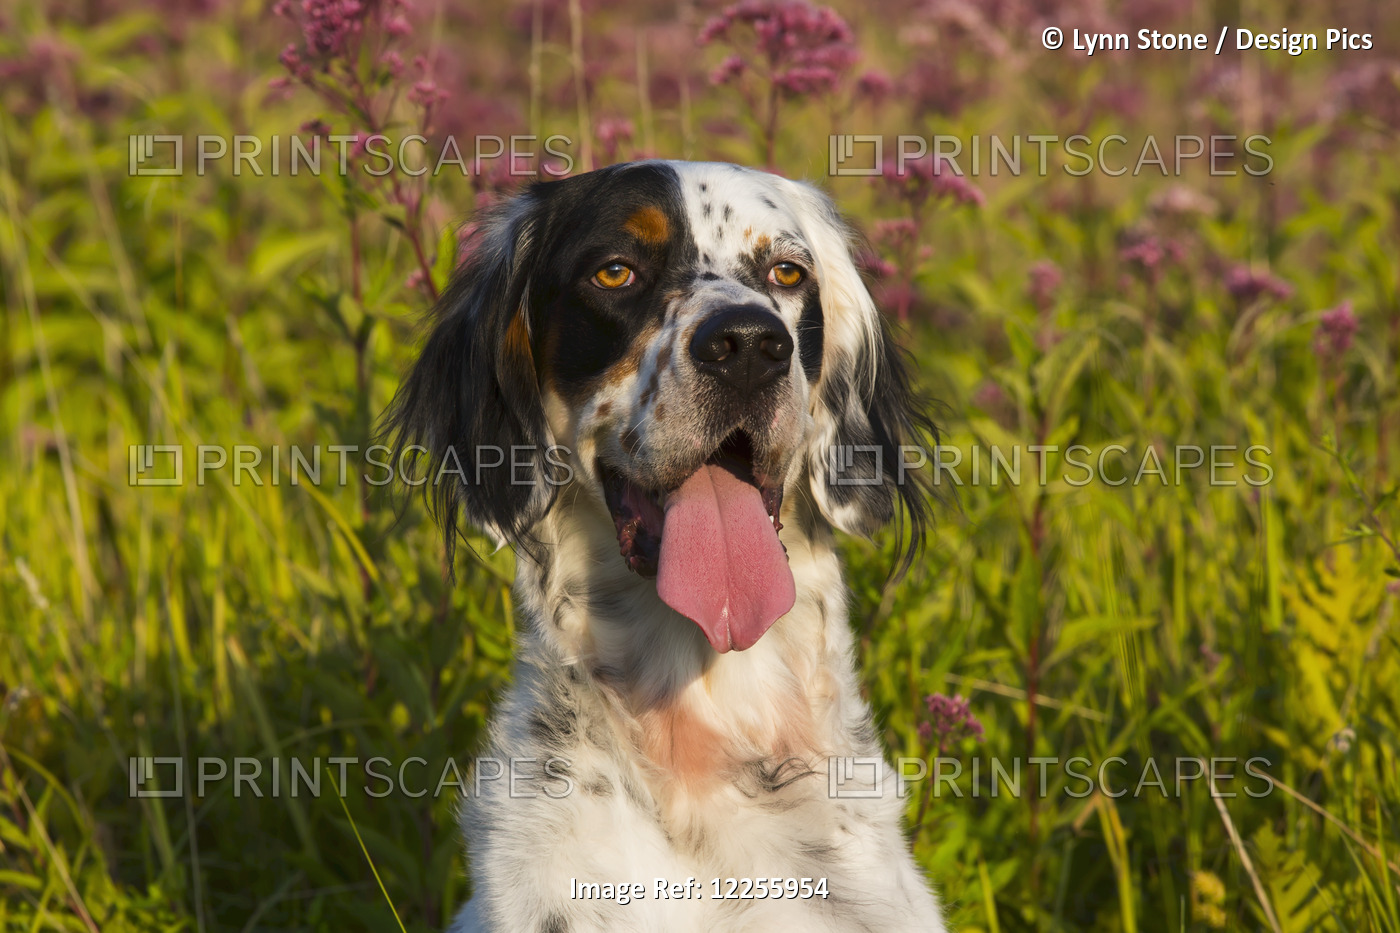 English Setter In Late Summer Vegetation; Waterford, Connecticut, United States ...